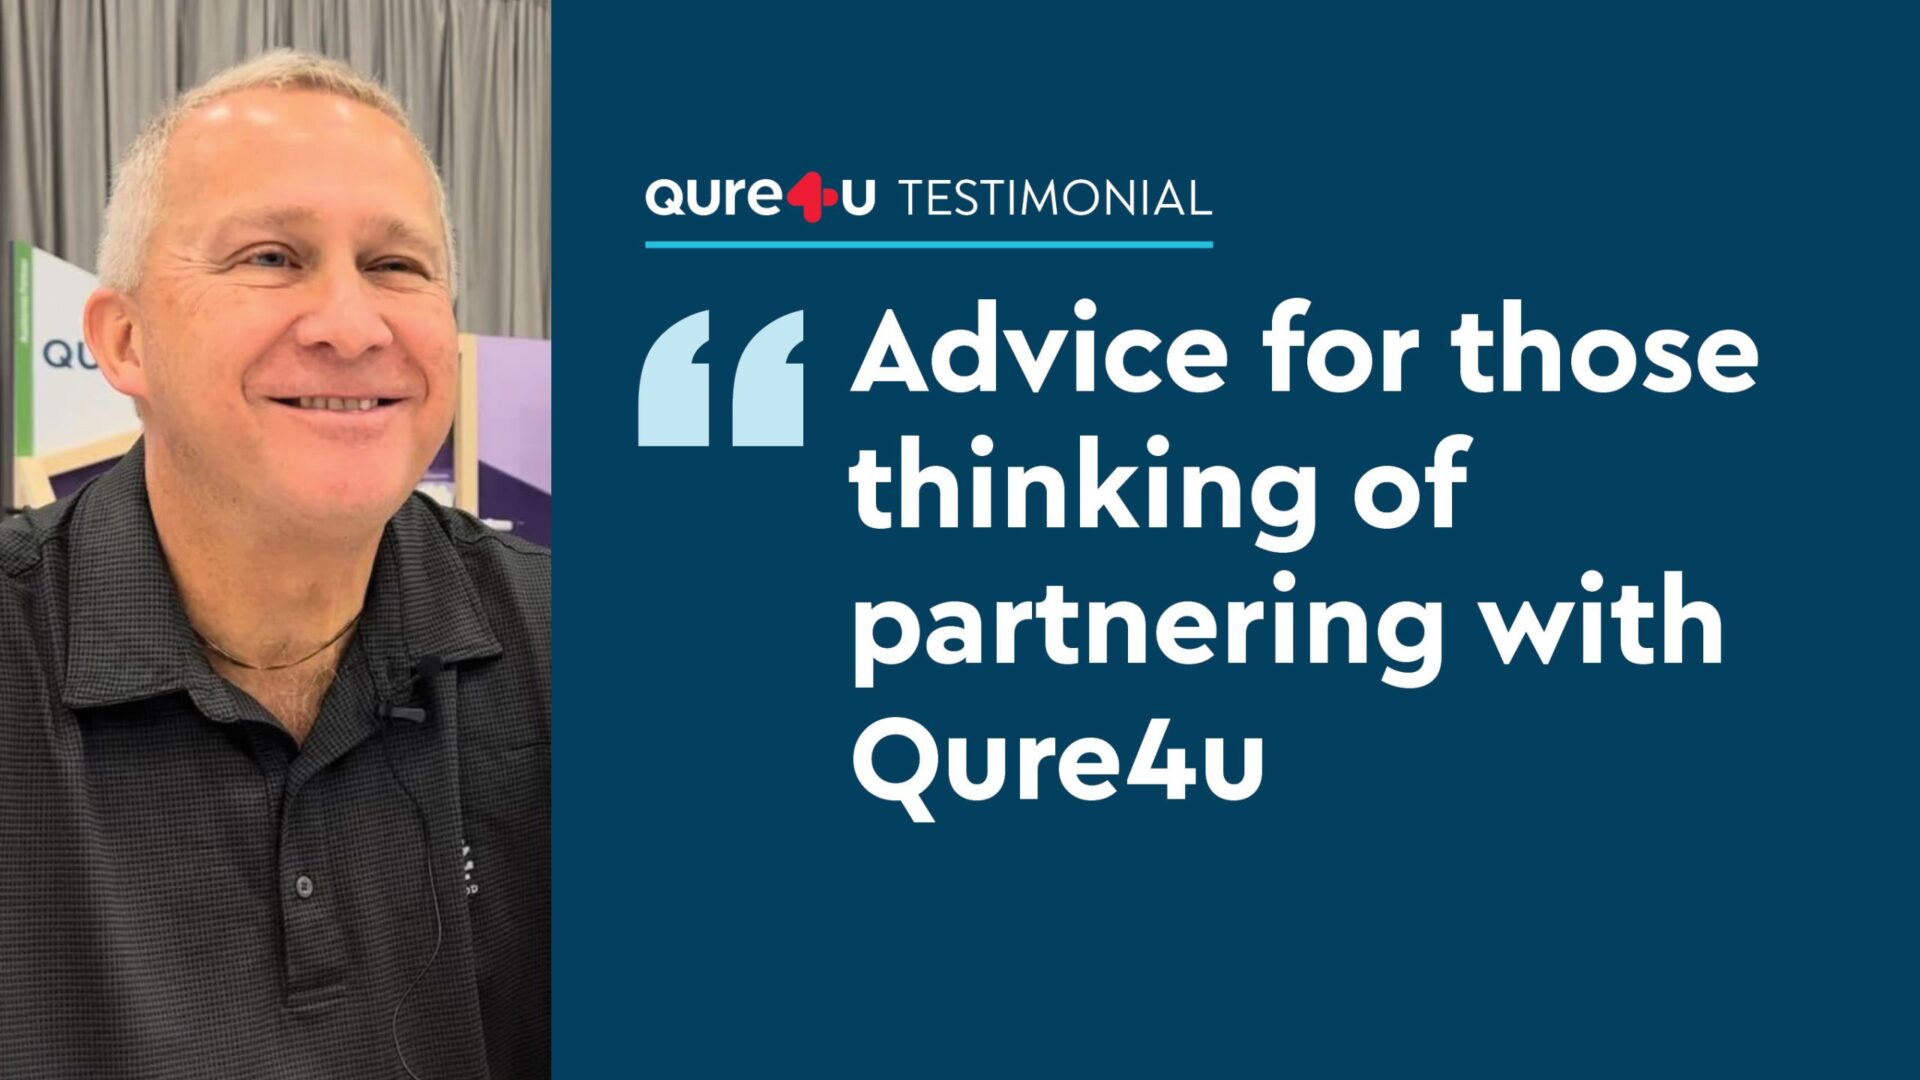 Testimonial: Advice for those considering a partnership with Qure4u